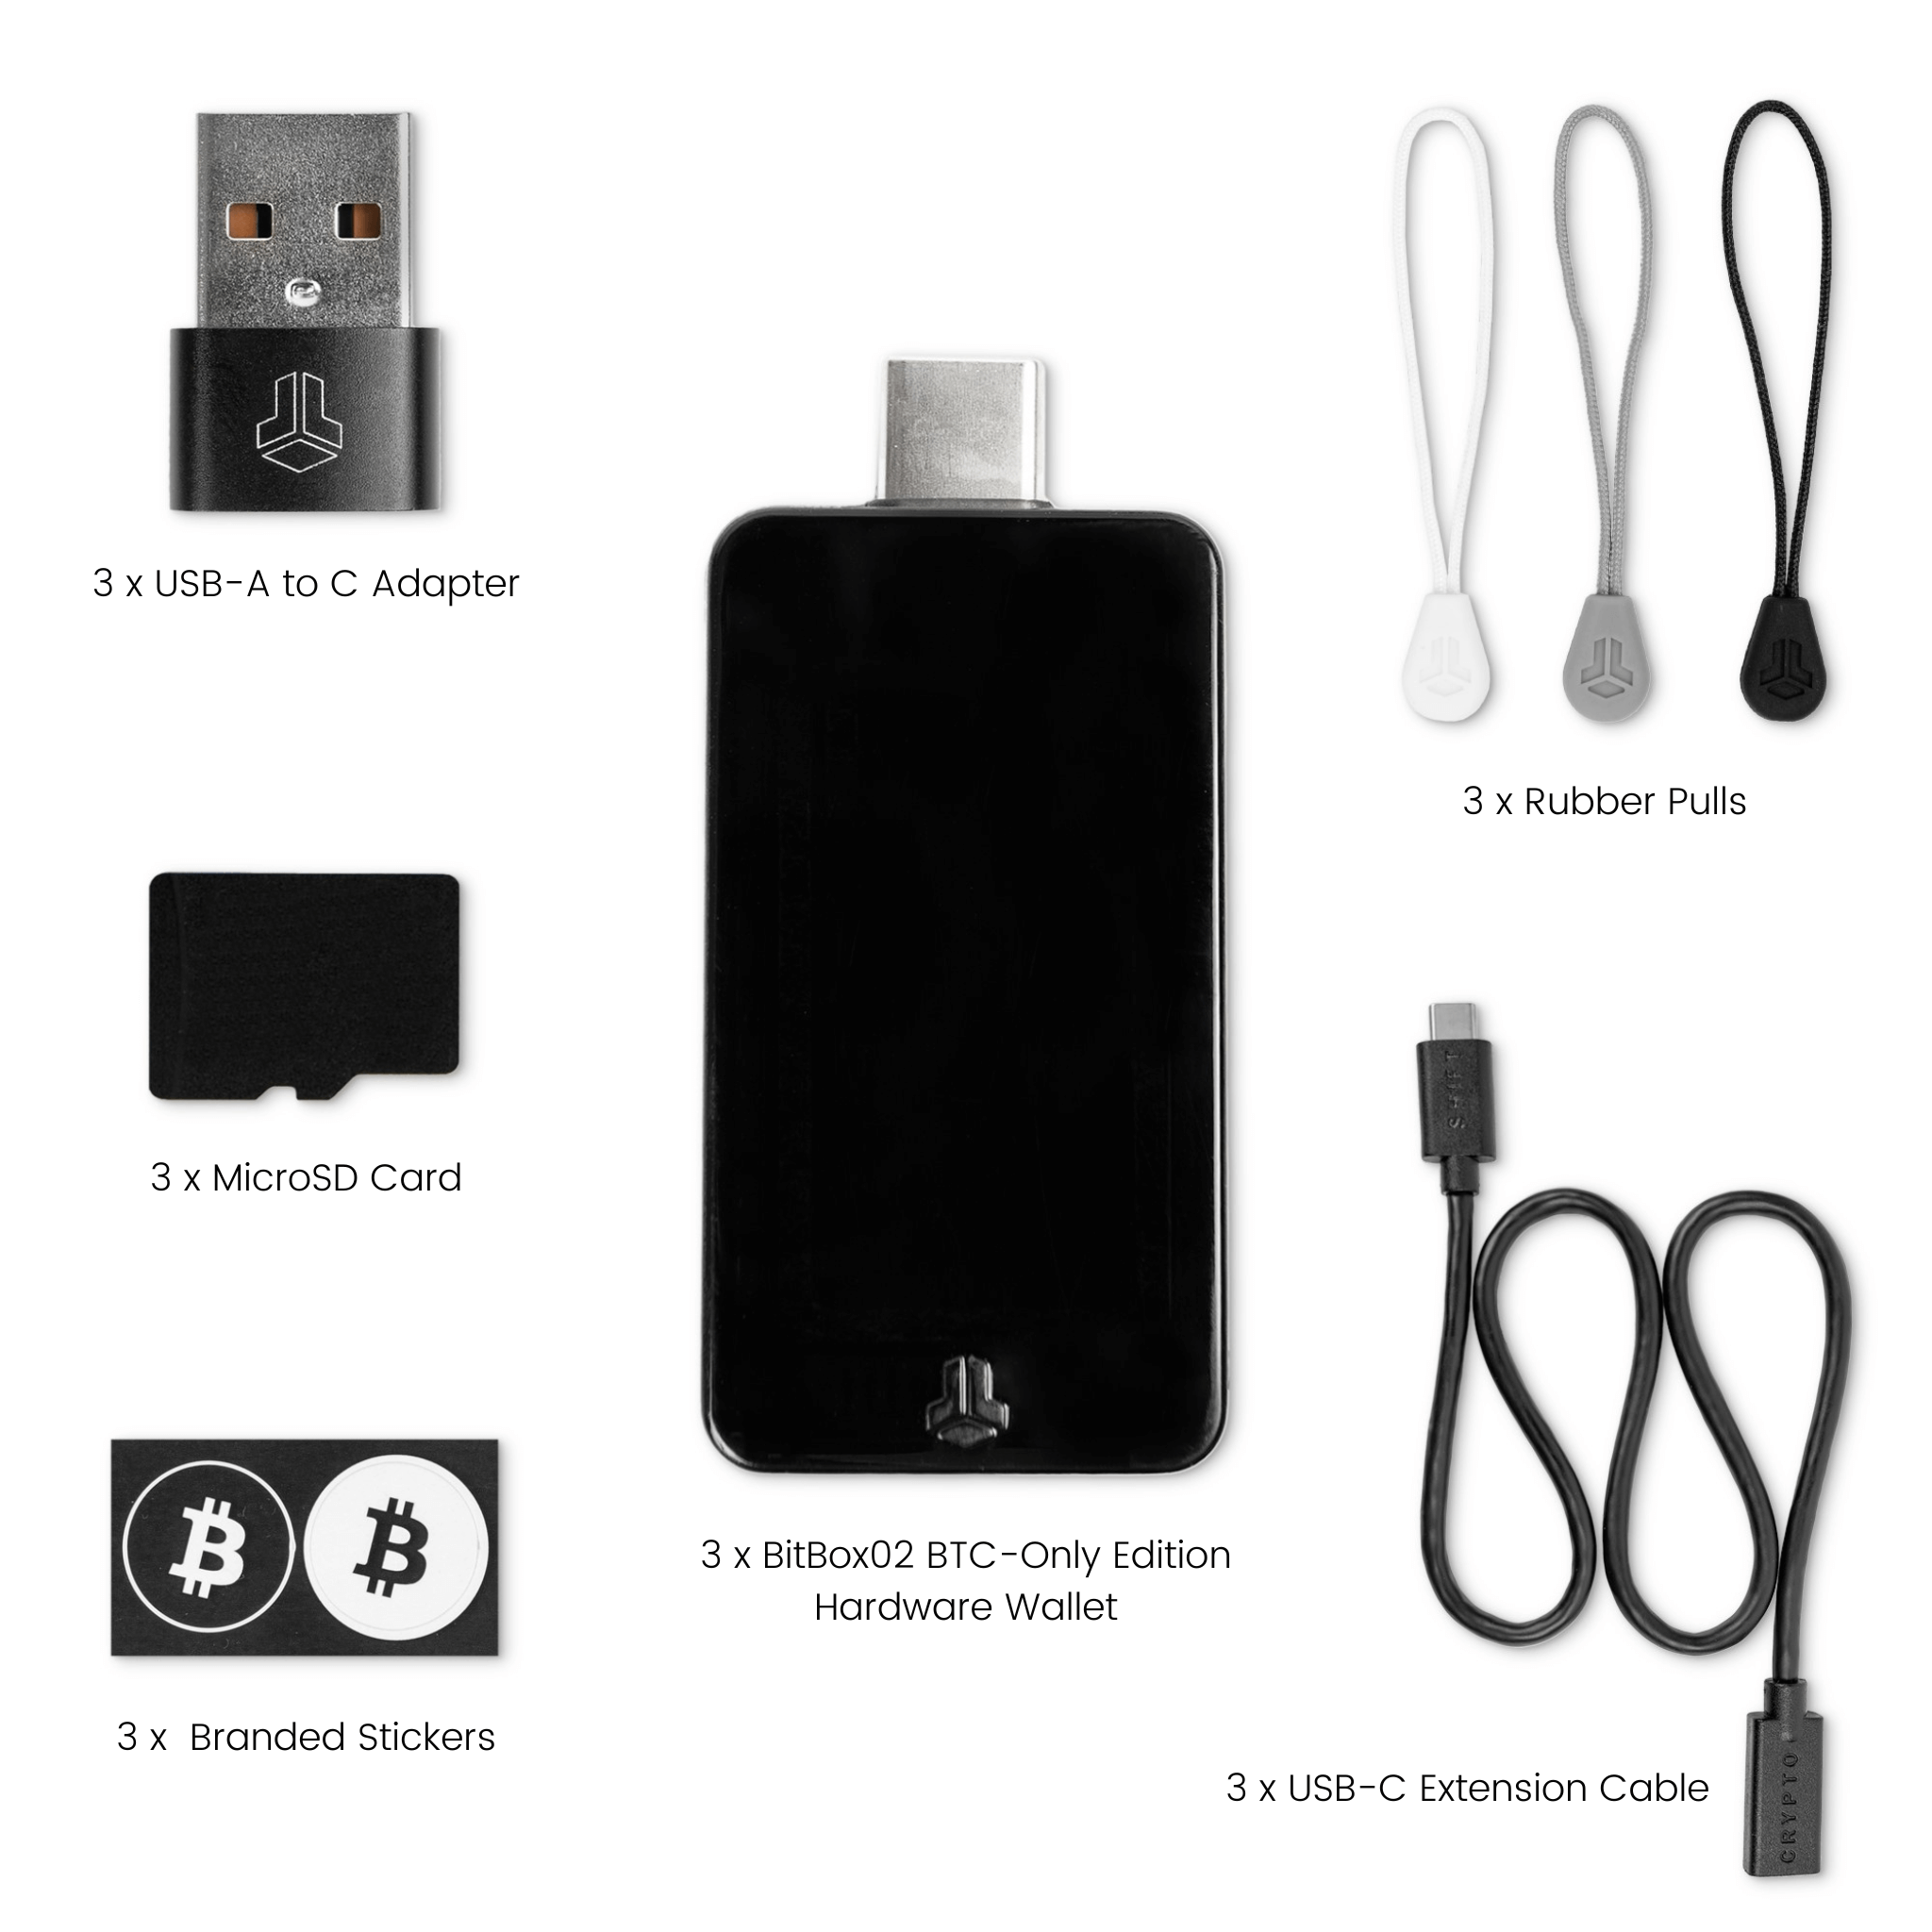 BitBox02 Bitcoin-Only Edition Pack of 3 Cryptocurrency Hardware Wallets Package Contents